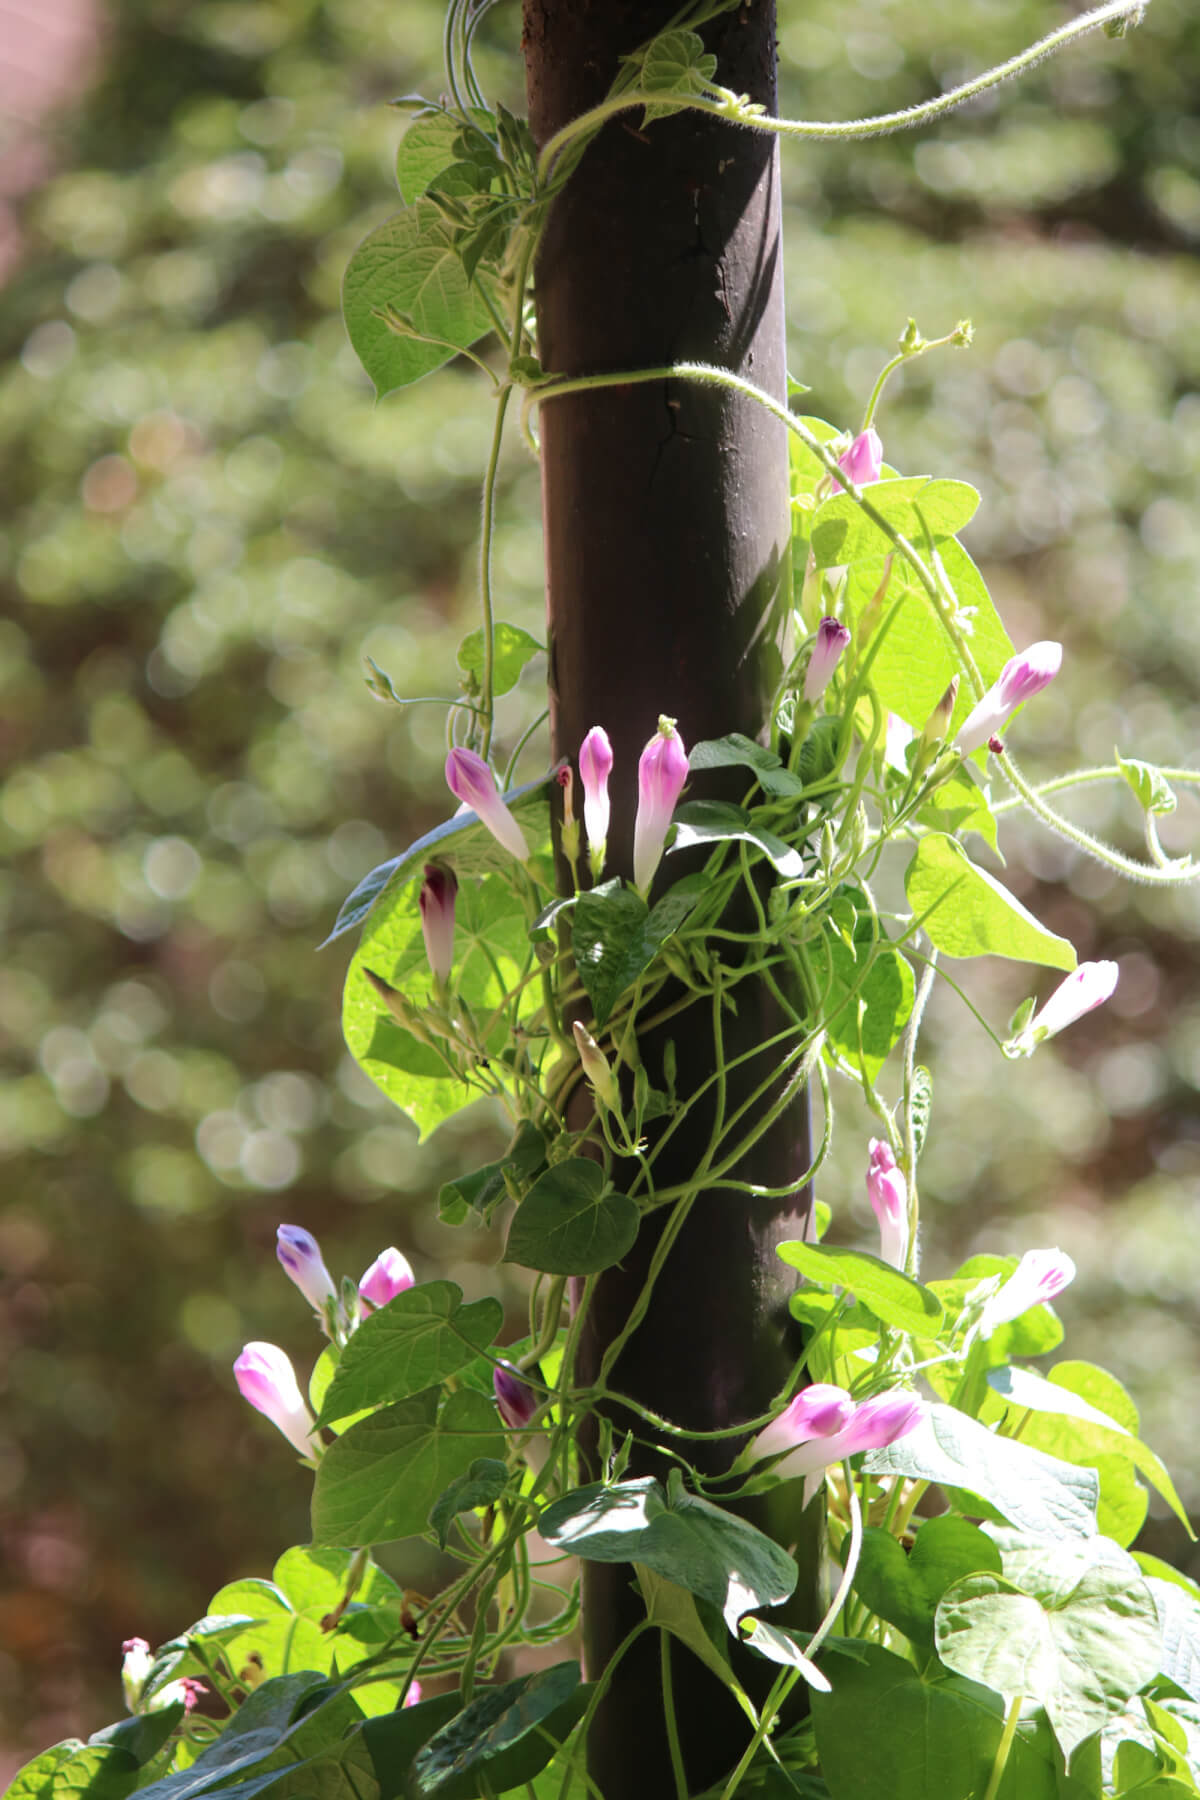 Morning glories, both pink and purple, are crawling up the light pole.